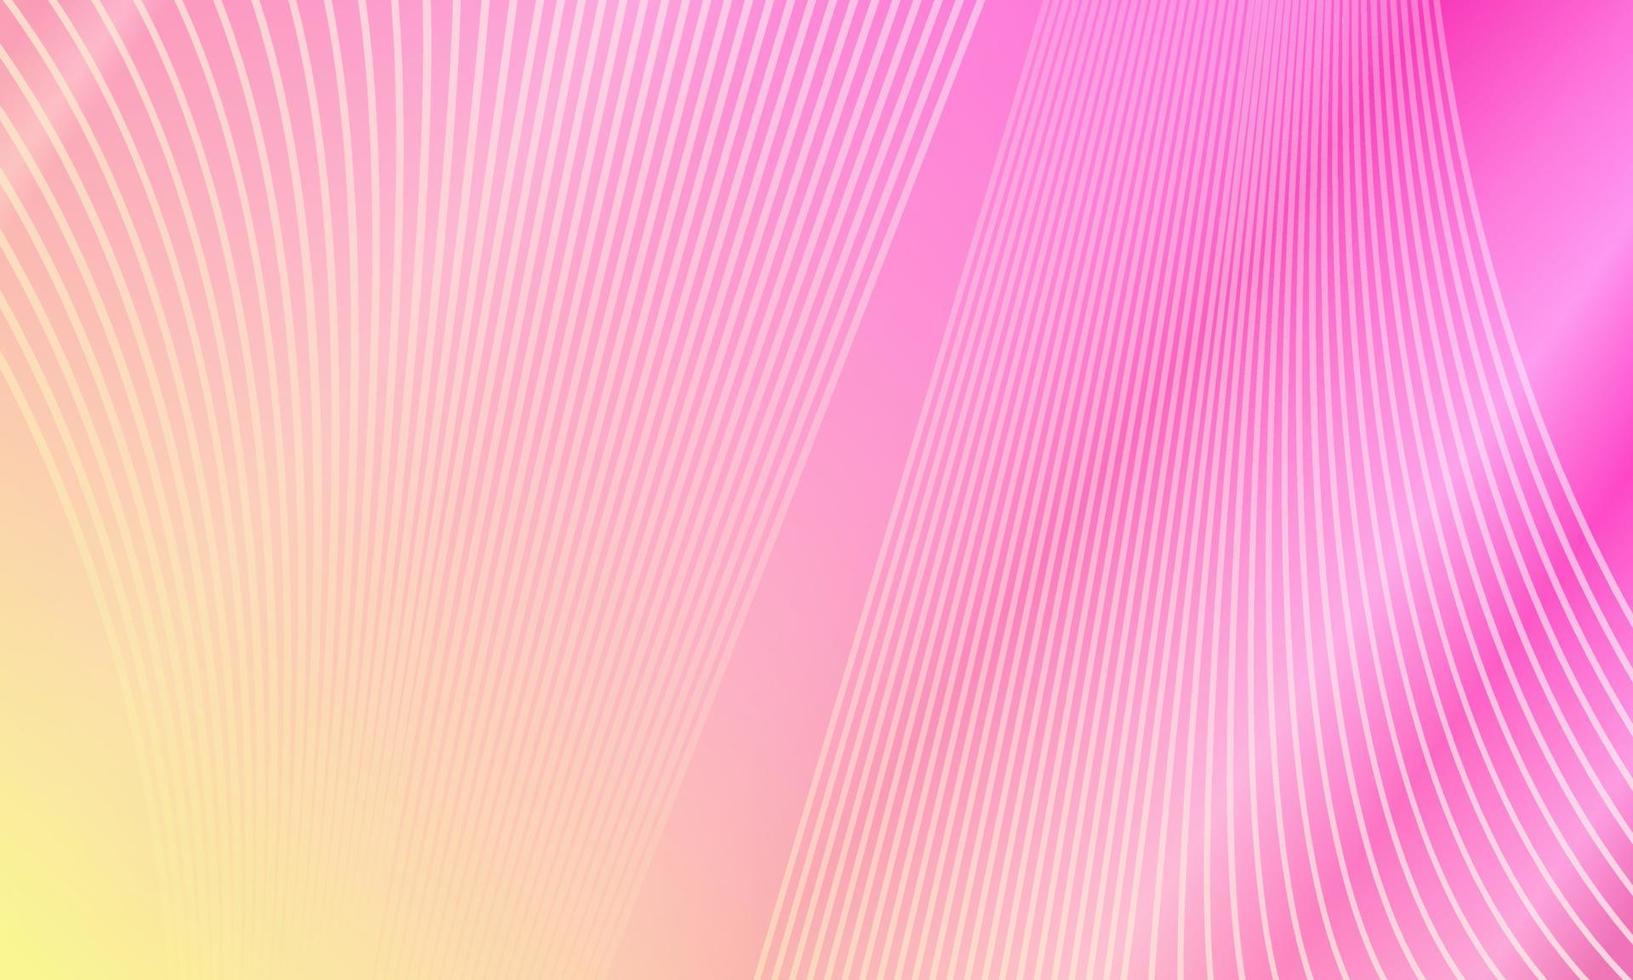 shining gradient abstract background with stripes pattern. suitable for wallpaper, banner or flyer. pink and orange vector